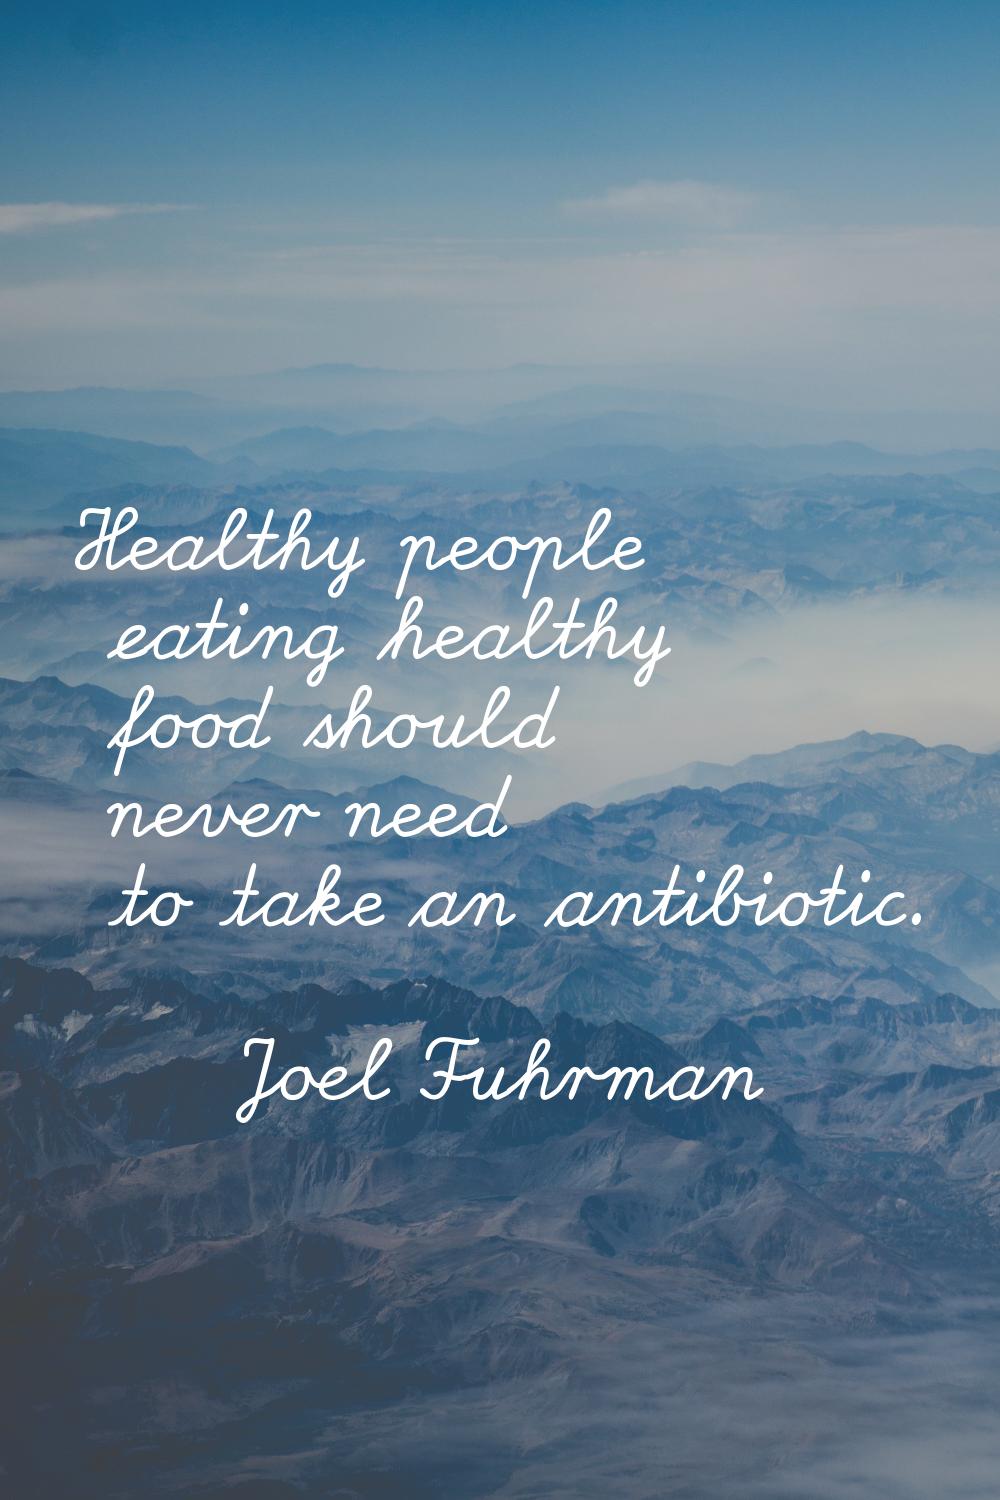 Healthy people eating healthy food should never need to take an antibiotic.